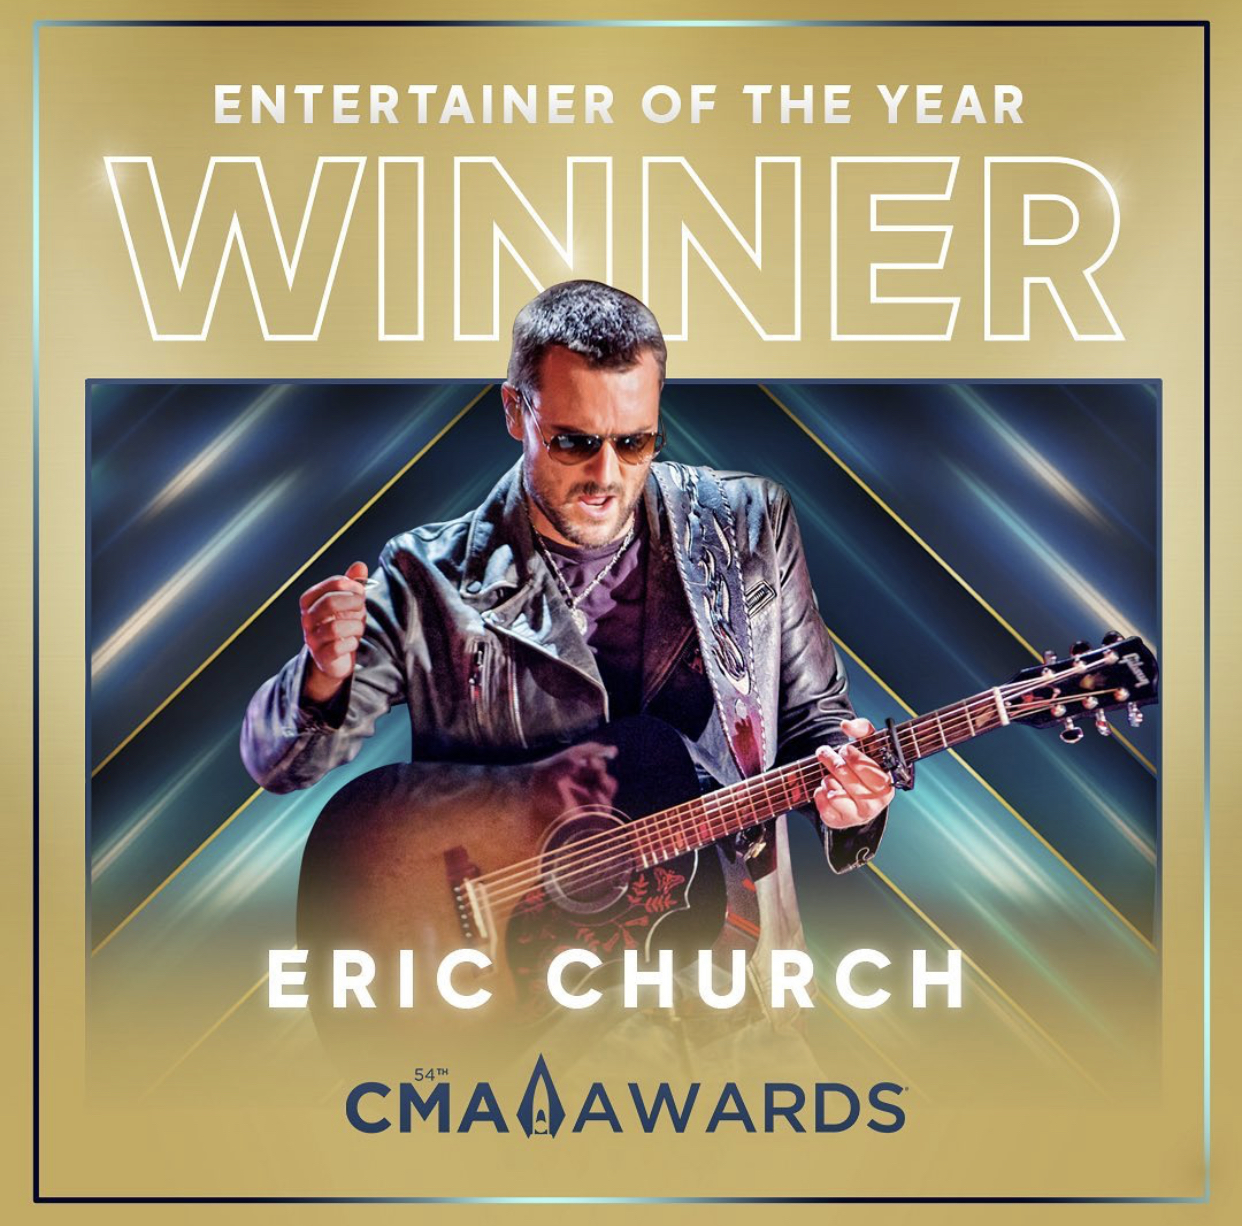 2020 CMA Awards Entertainer of the Year, Eric Church